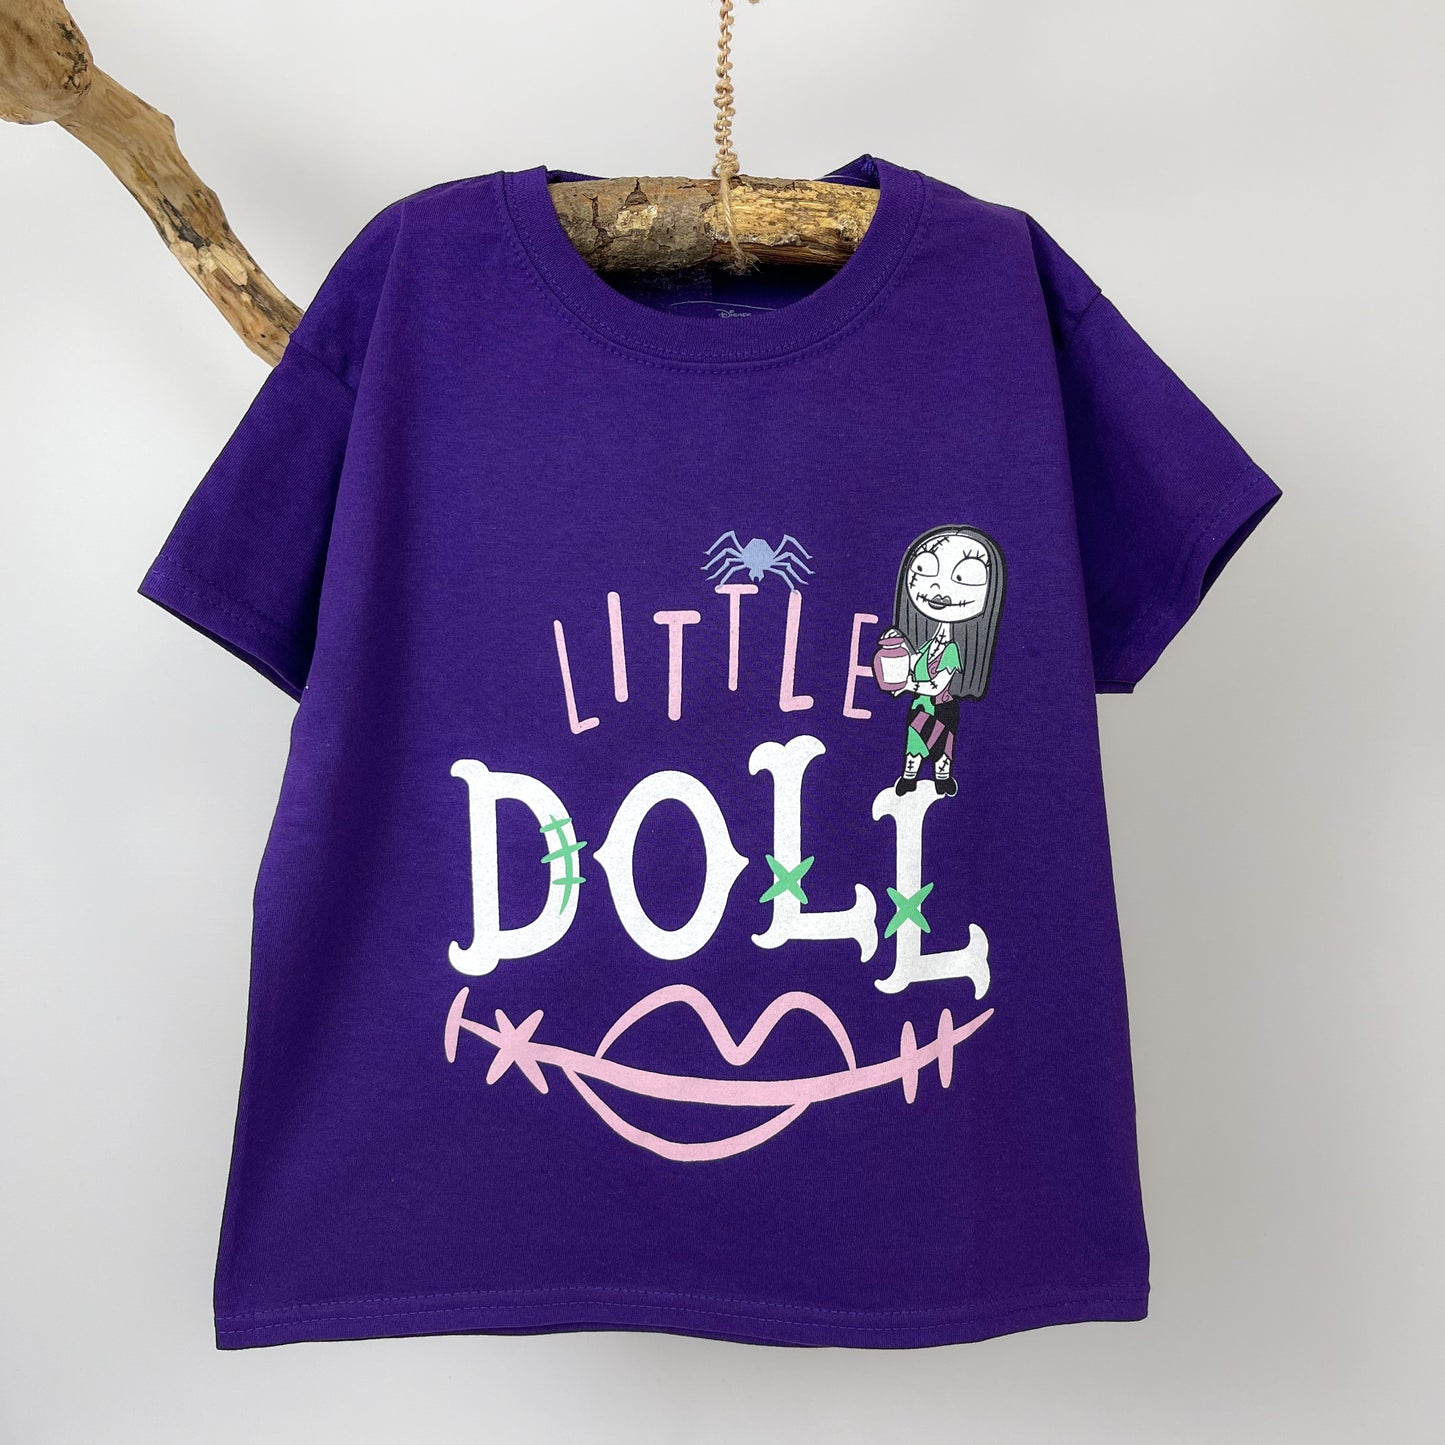 THE NIGHTMARE BEFORE CHRISTMAS LITTLE DOLL T-SHIRT